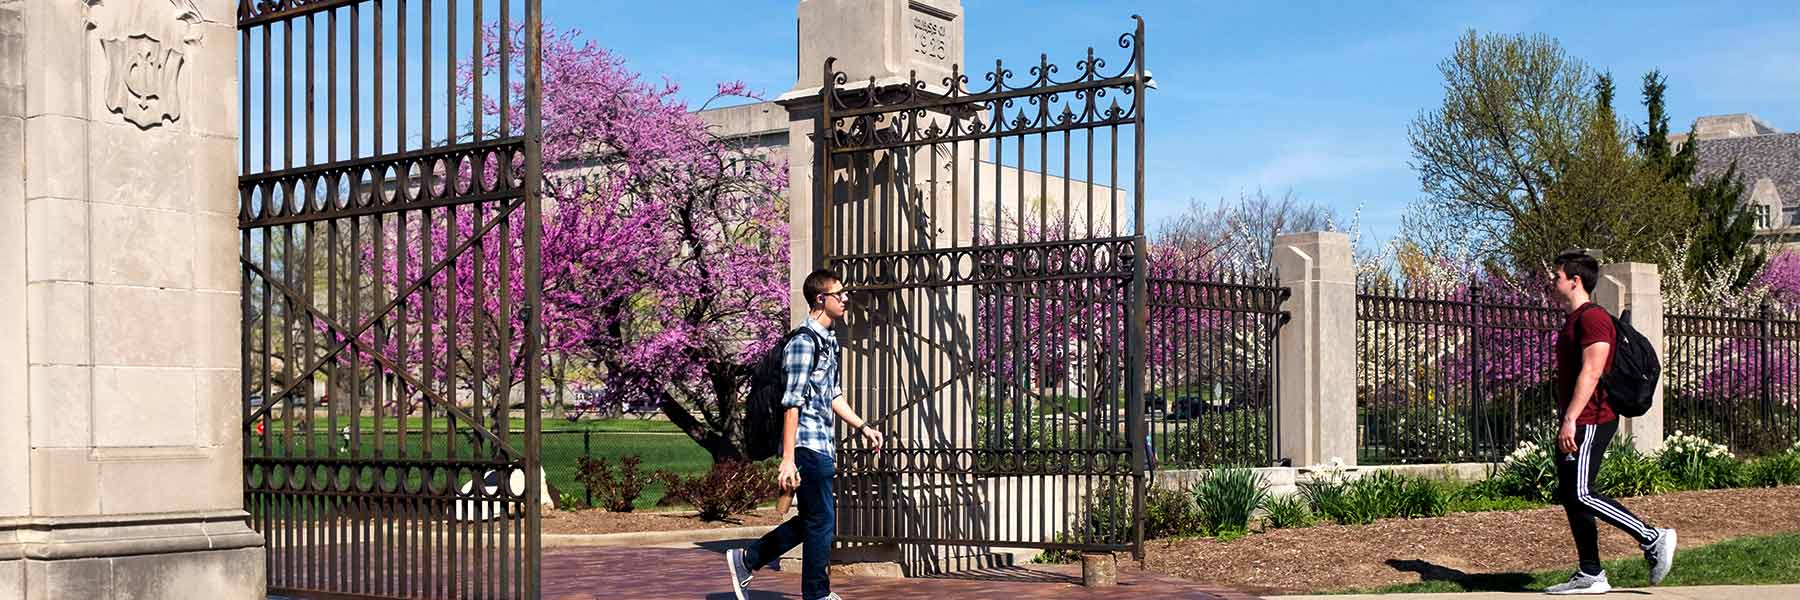 A student walks past gates in the Arboretum at IU Bloomington on a sunny spring day.